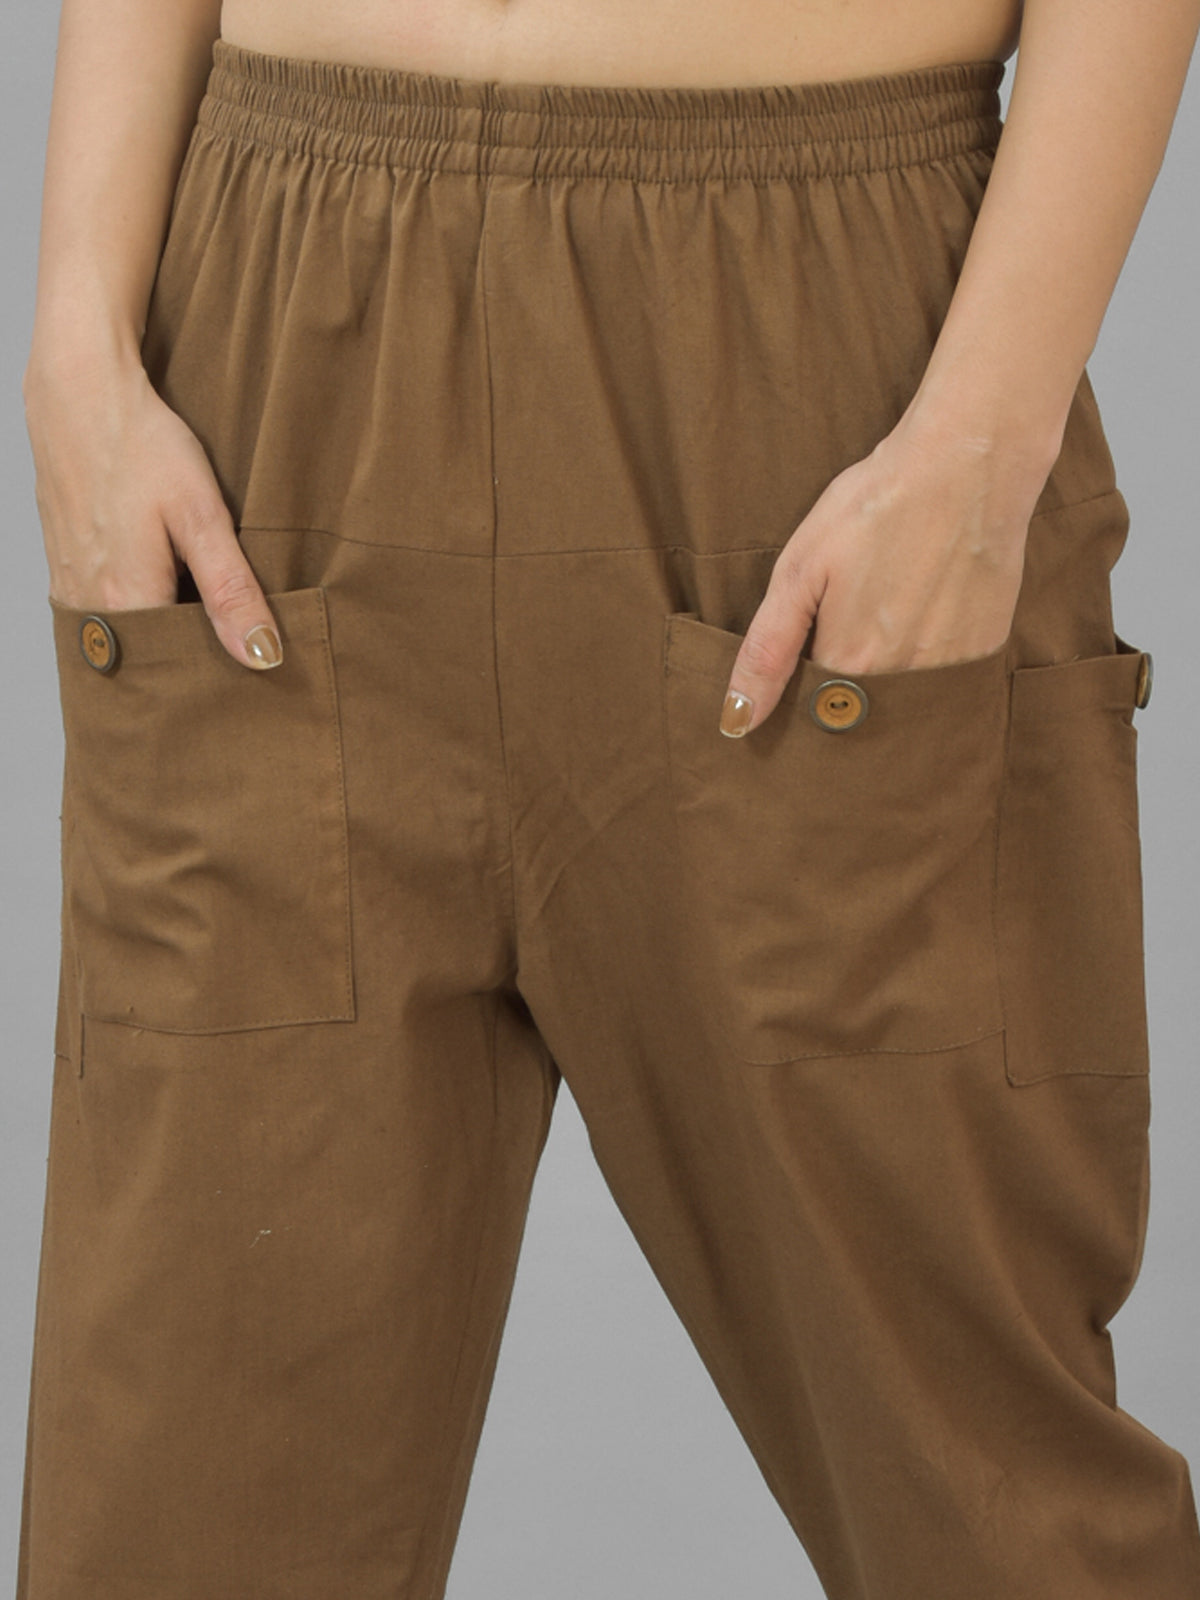 Combo Pack Of Womens Brown And White Four Pocket Cotton Cargo Pants